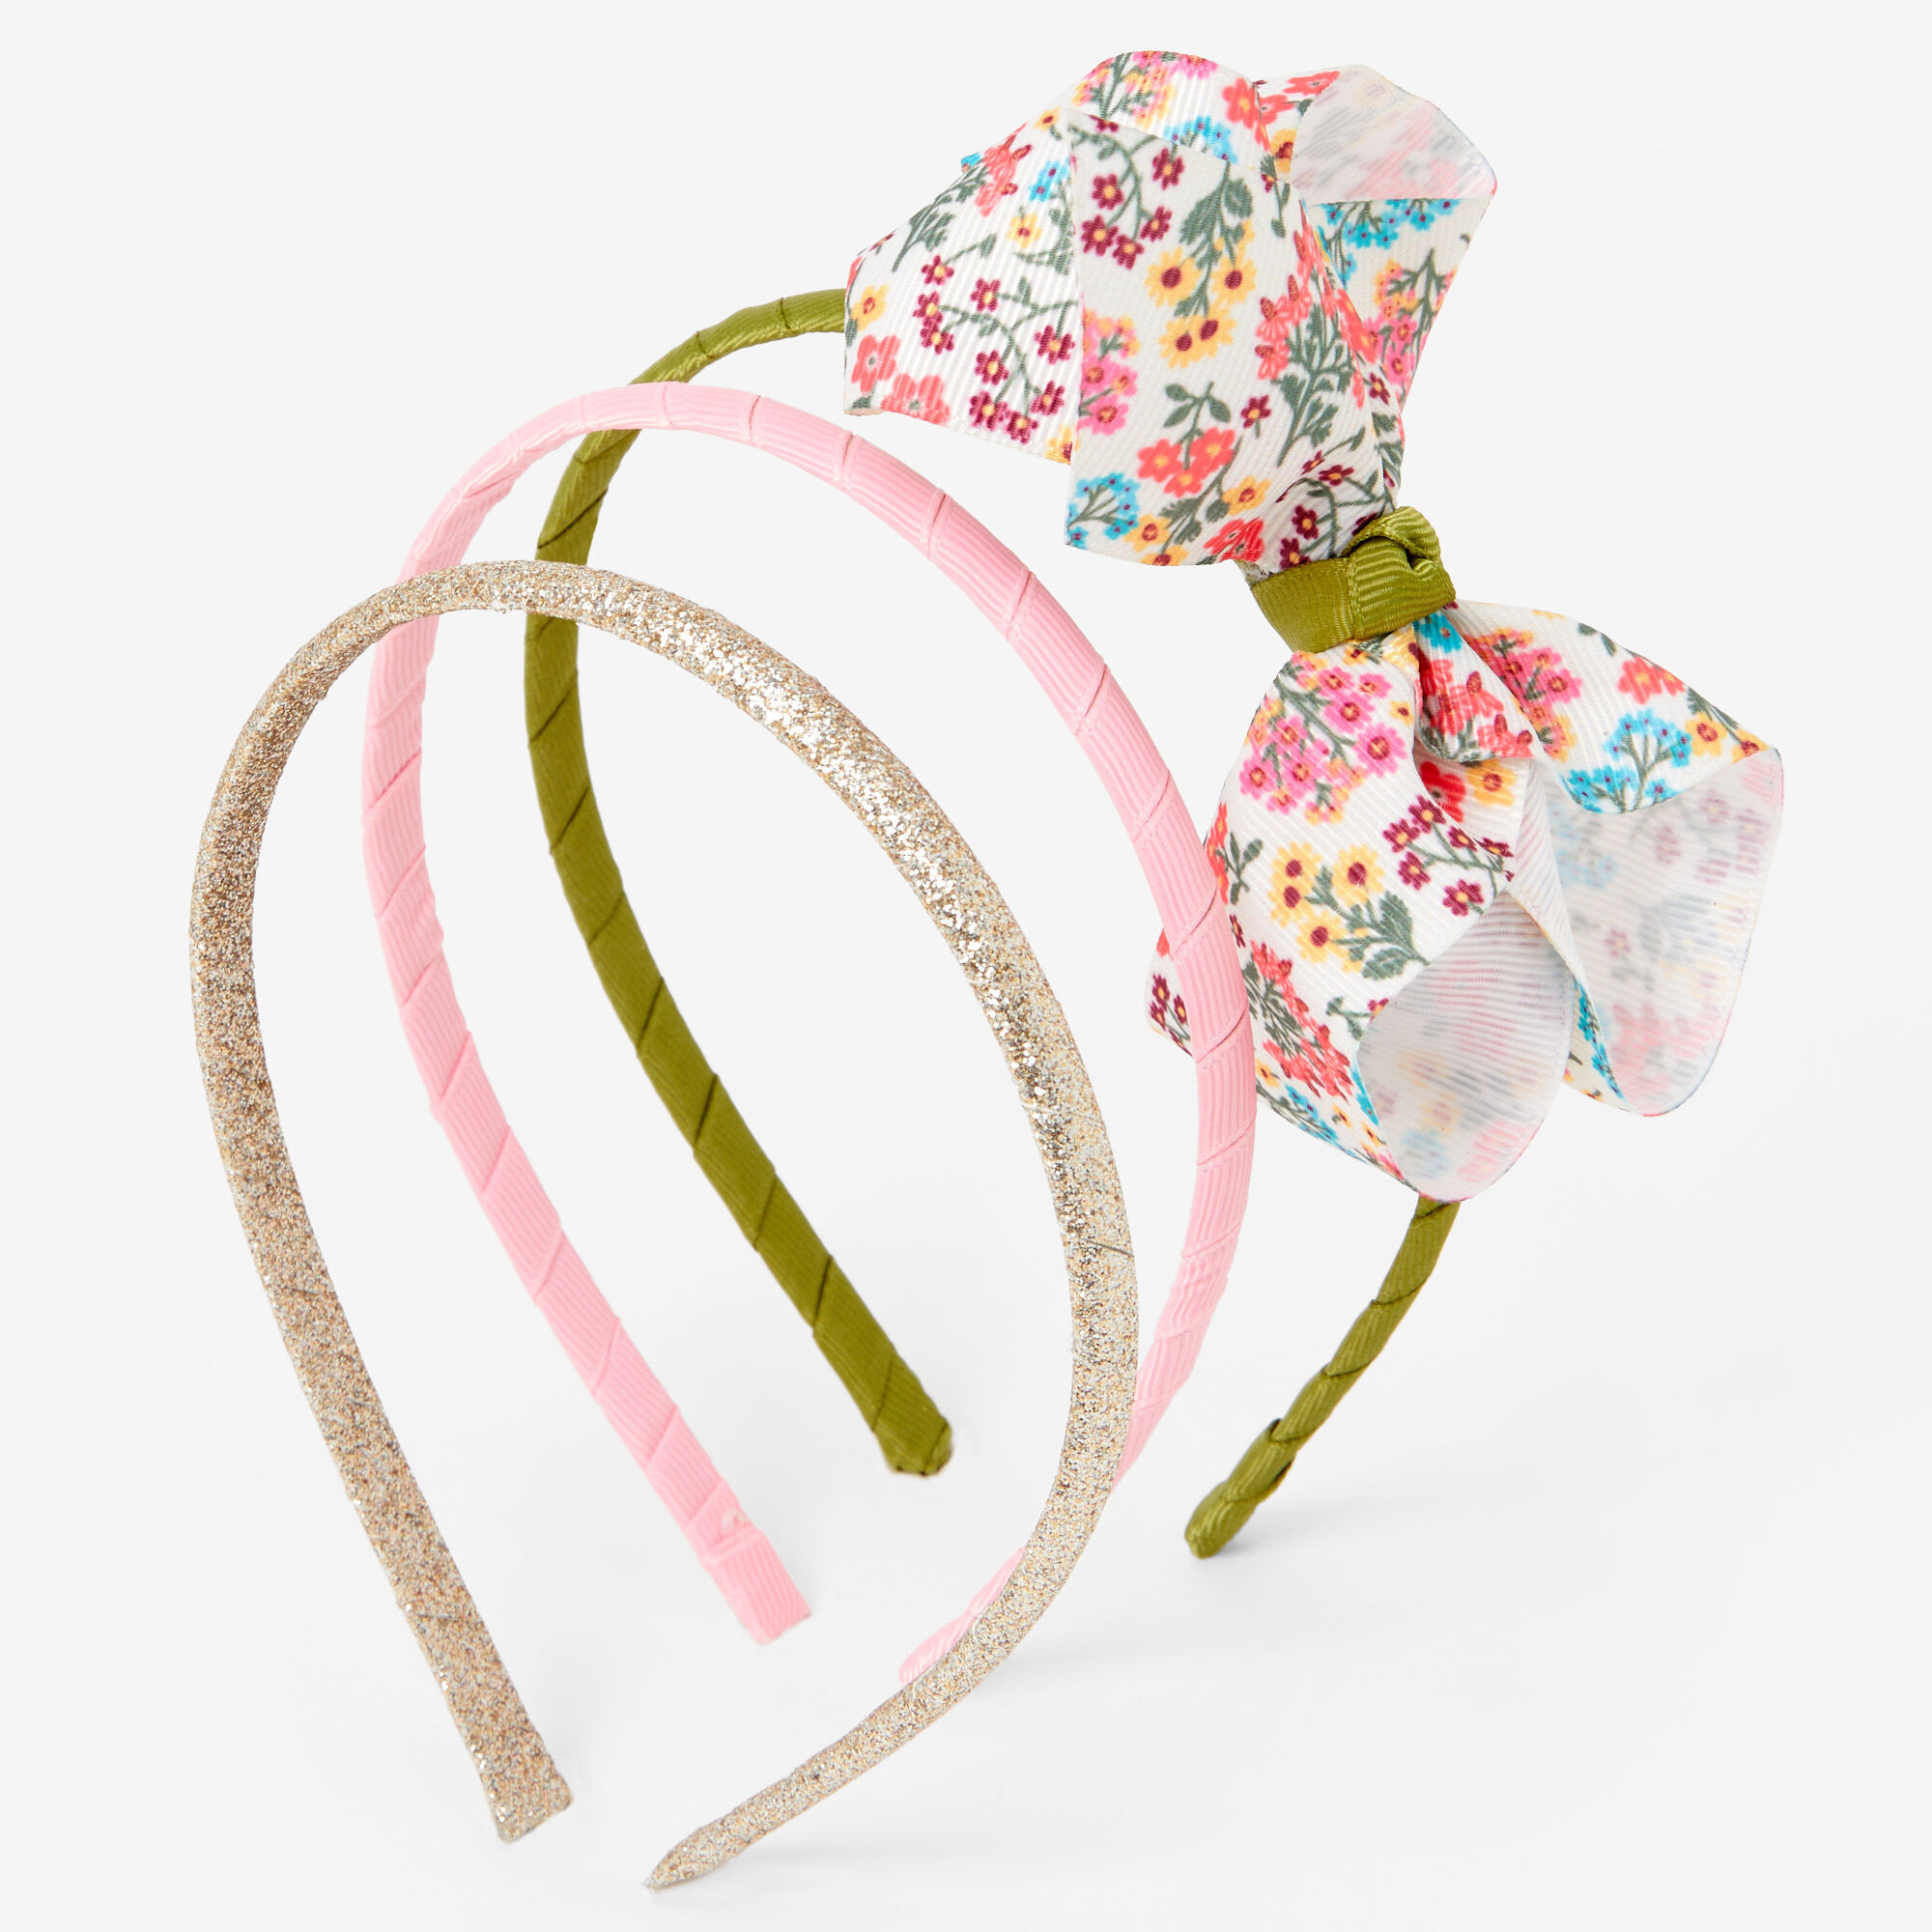 Claire's Club Floral & Glitter Headband Set - 3 Pack